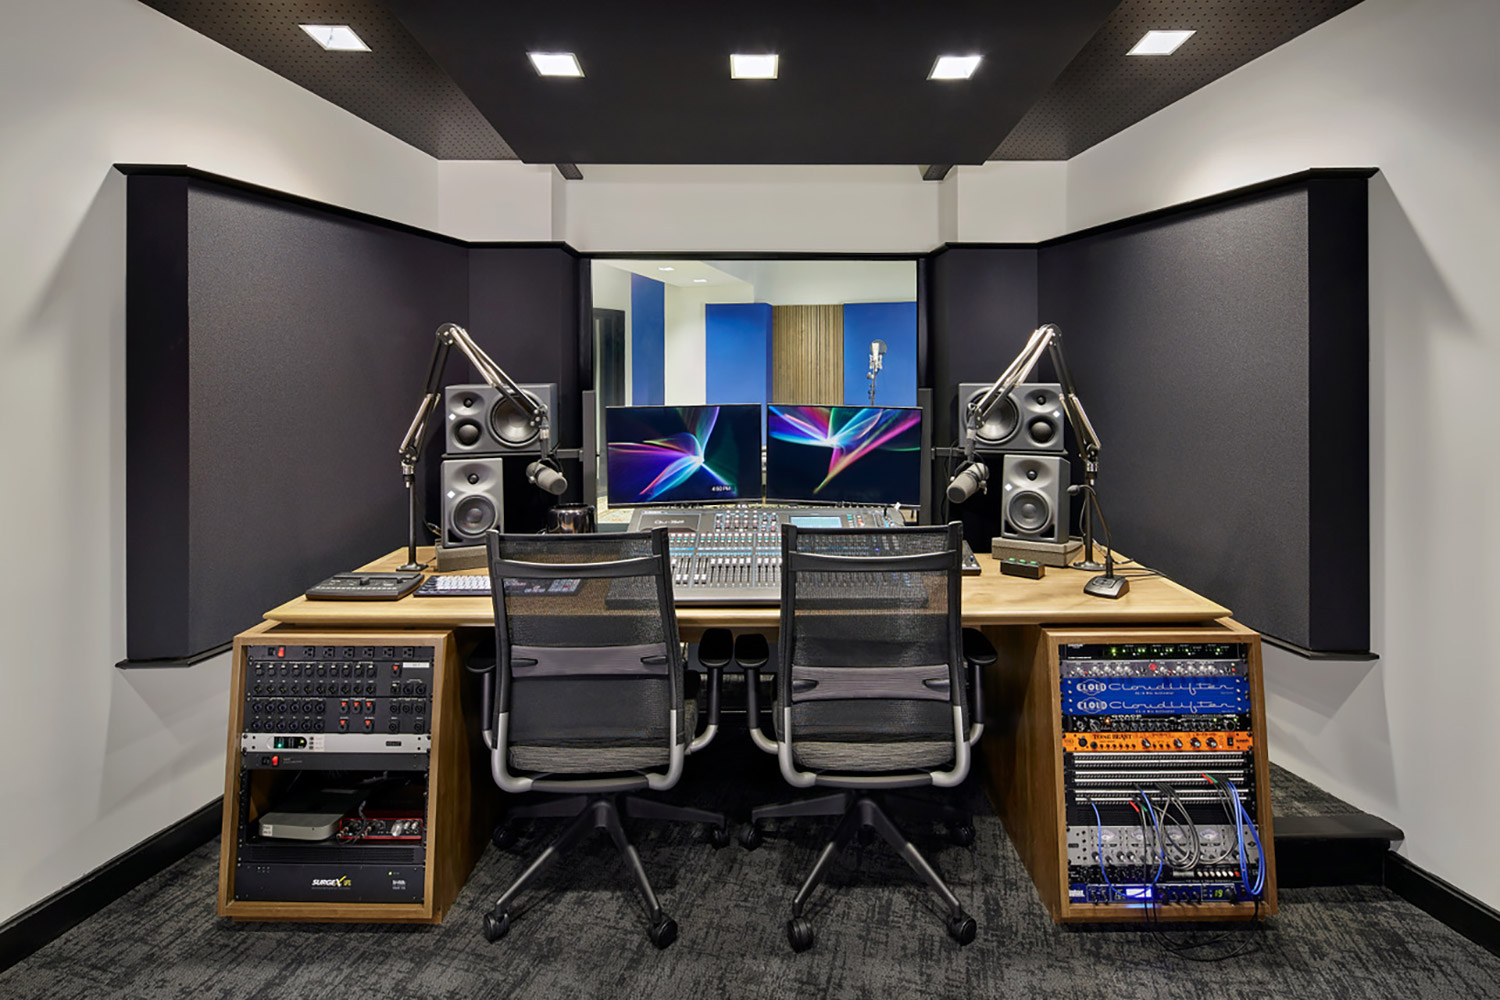 Stitcher is among the earliest, the most creative and most successful podcast creator companies. Their team made a move to build out larger production facilities in both its NY and LA offices and they chose WSDG to design their new podcast studios facilities. Control A.